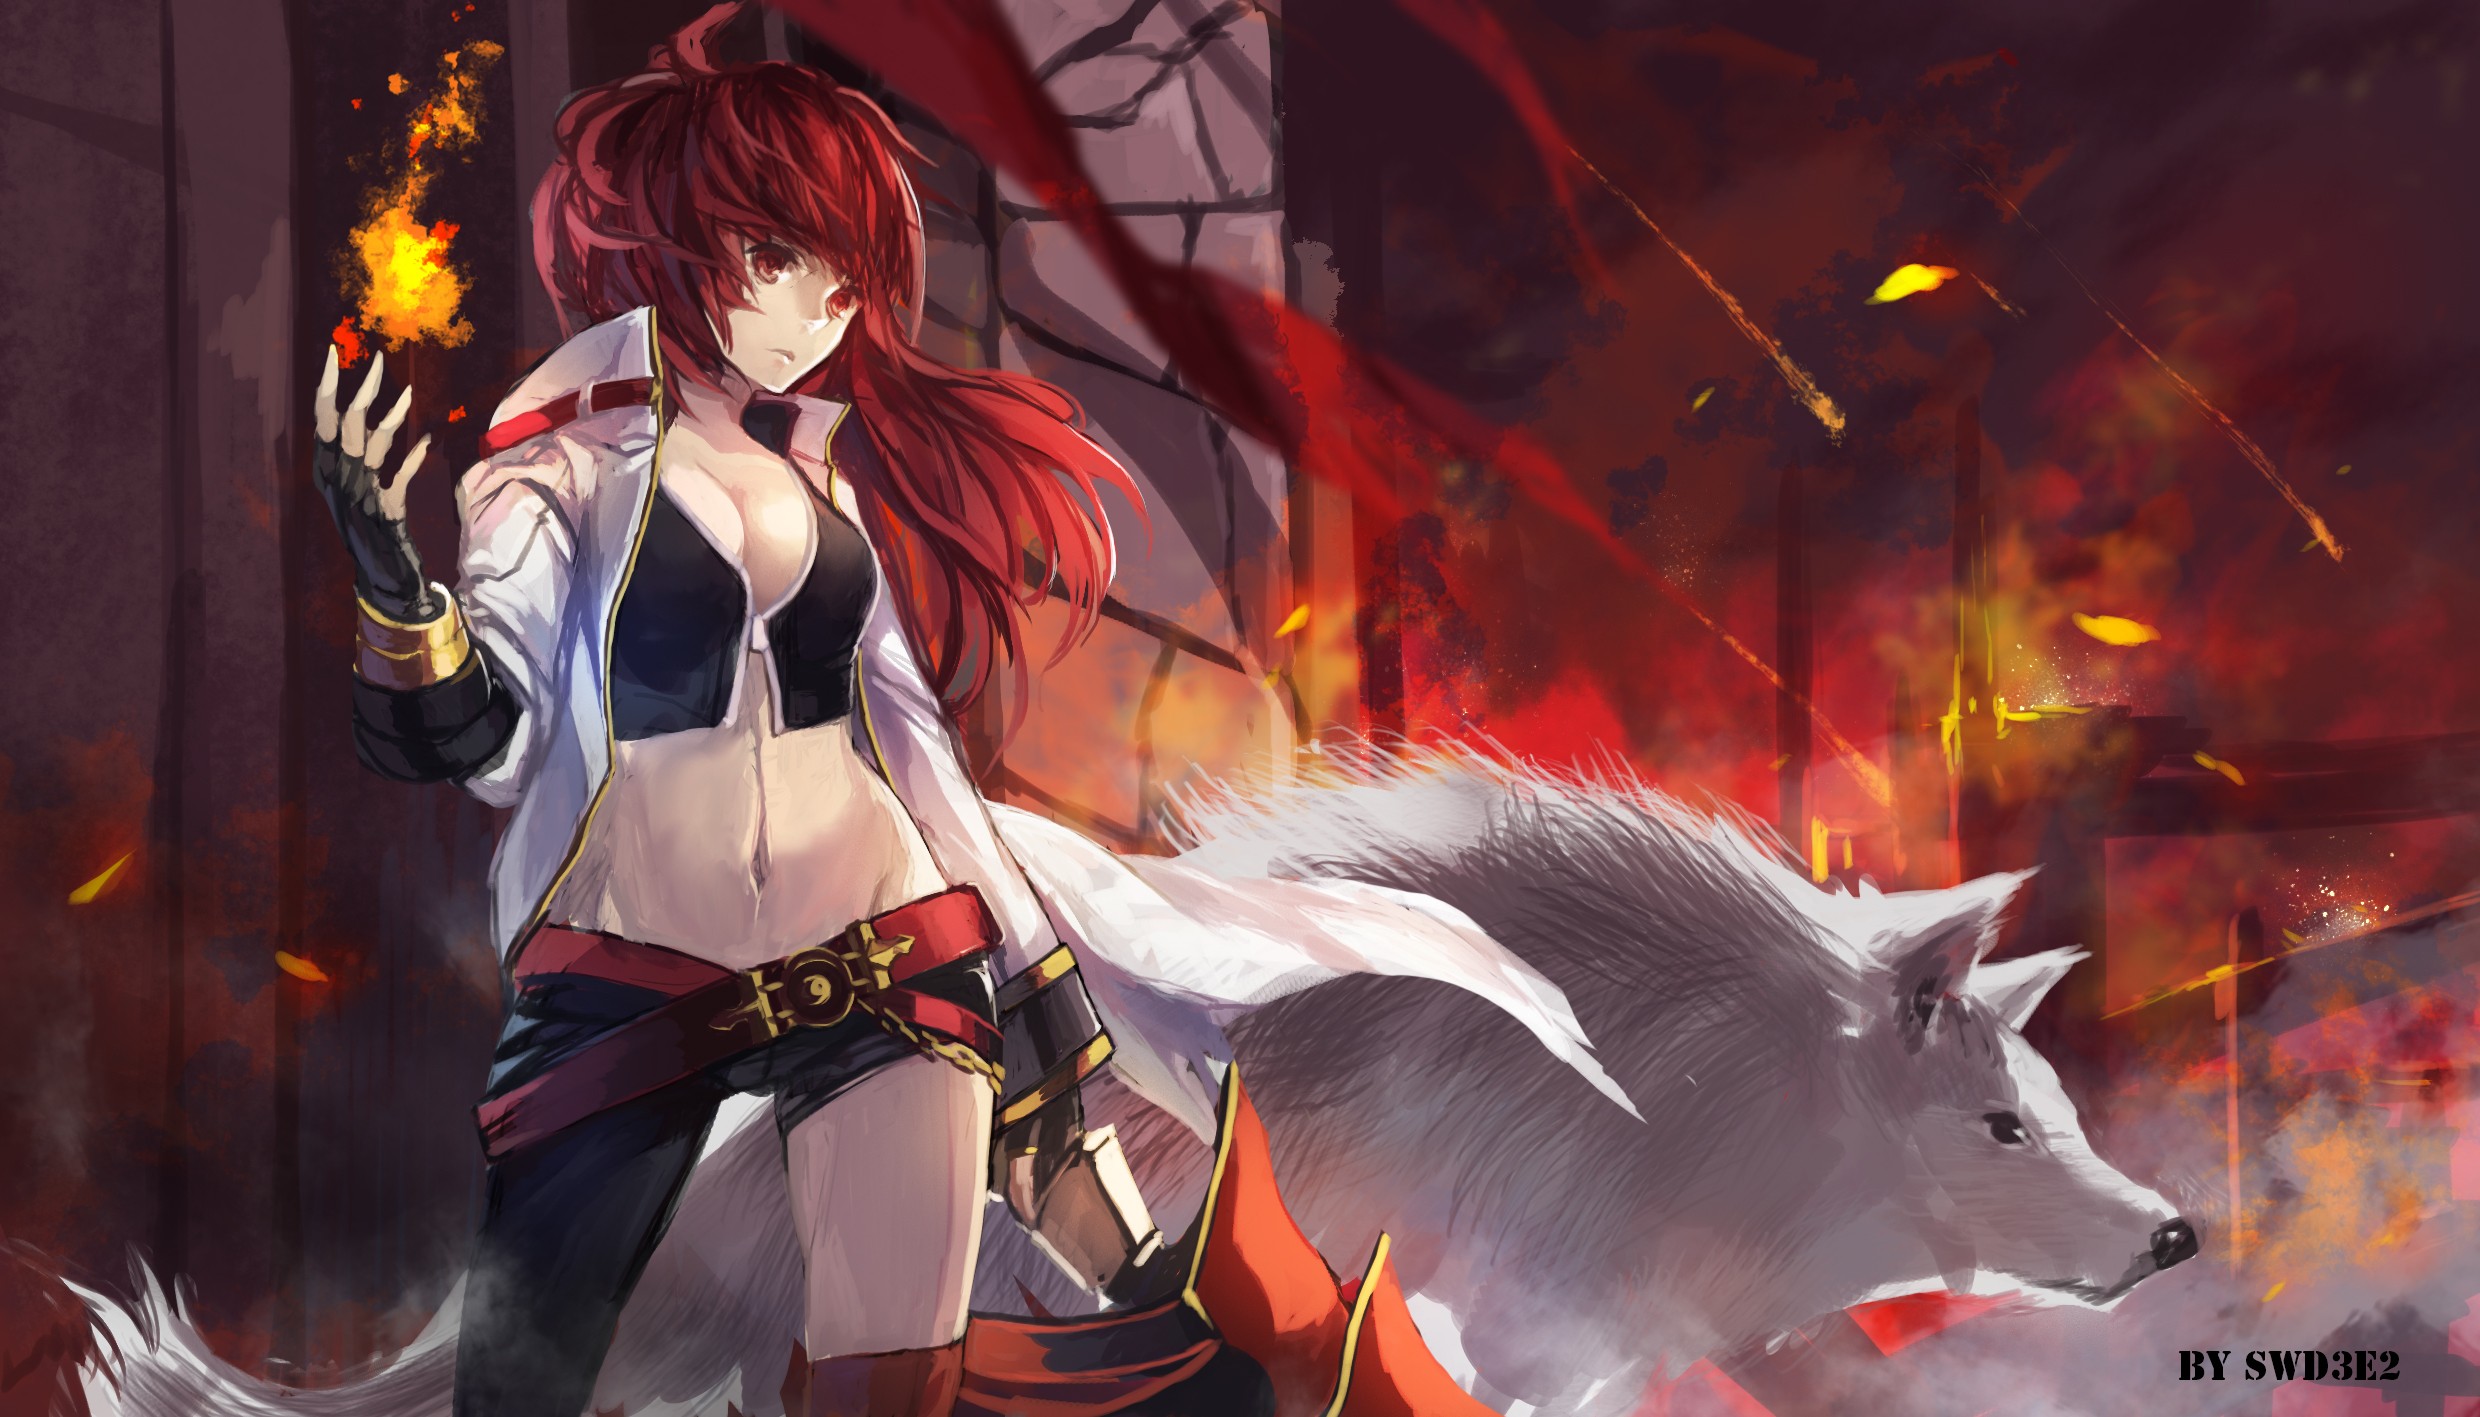 Anime 2480x1417 anime anime girls Swd3e2 redhead wolf Elesis (Elsword) Elsword fire cleavage gloves red eyes long hair belly